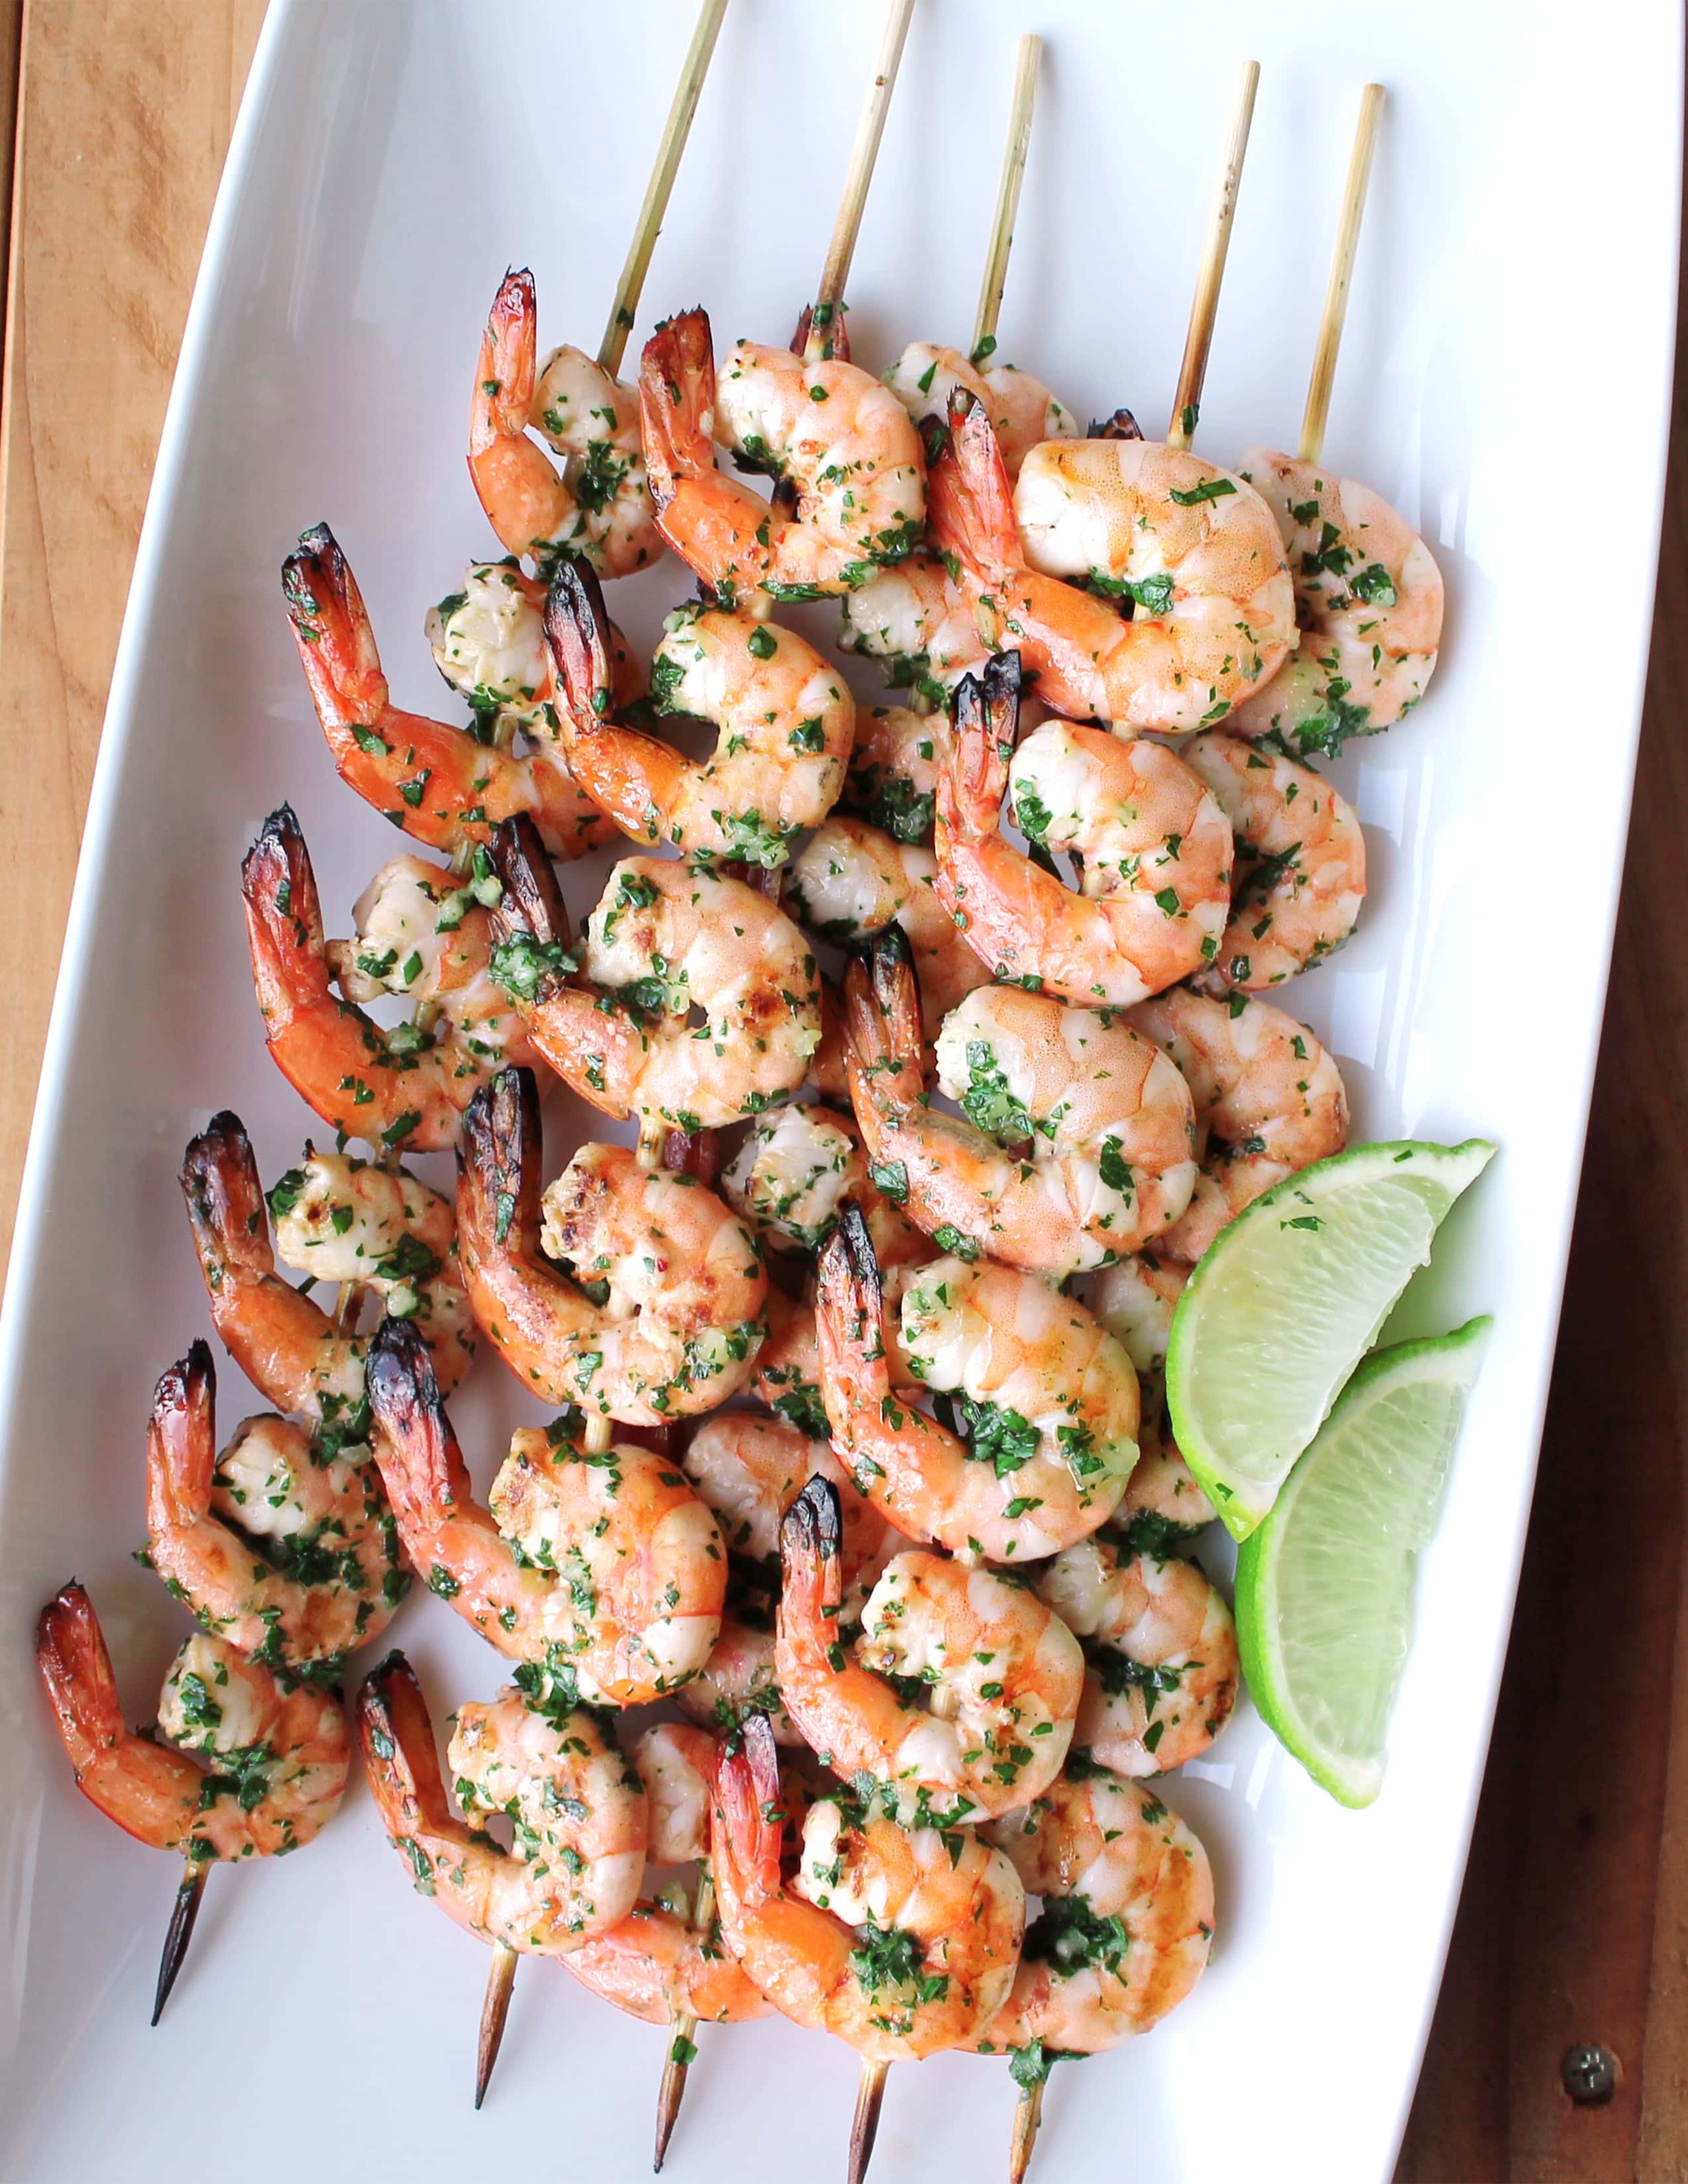 Grilled Shrimp With Cilantro Garlic Butter Kit S Kitchen,Rubber Band Tricks With One Rubber Band